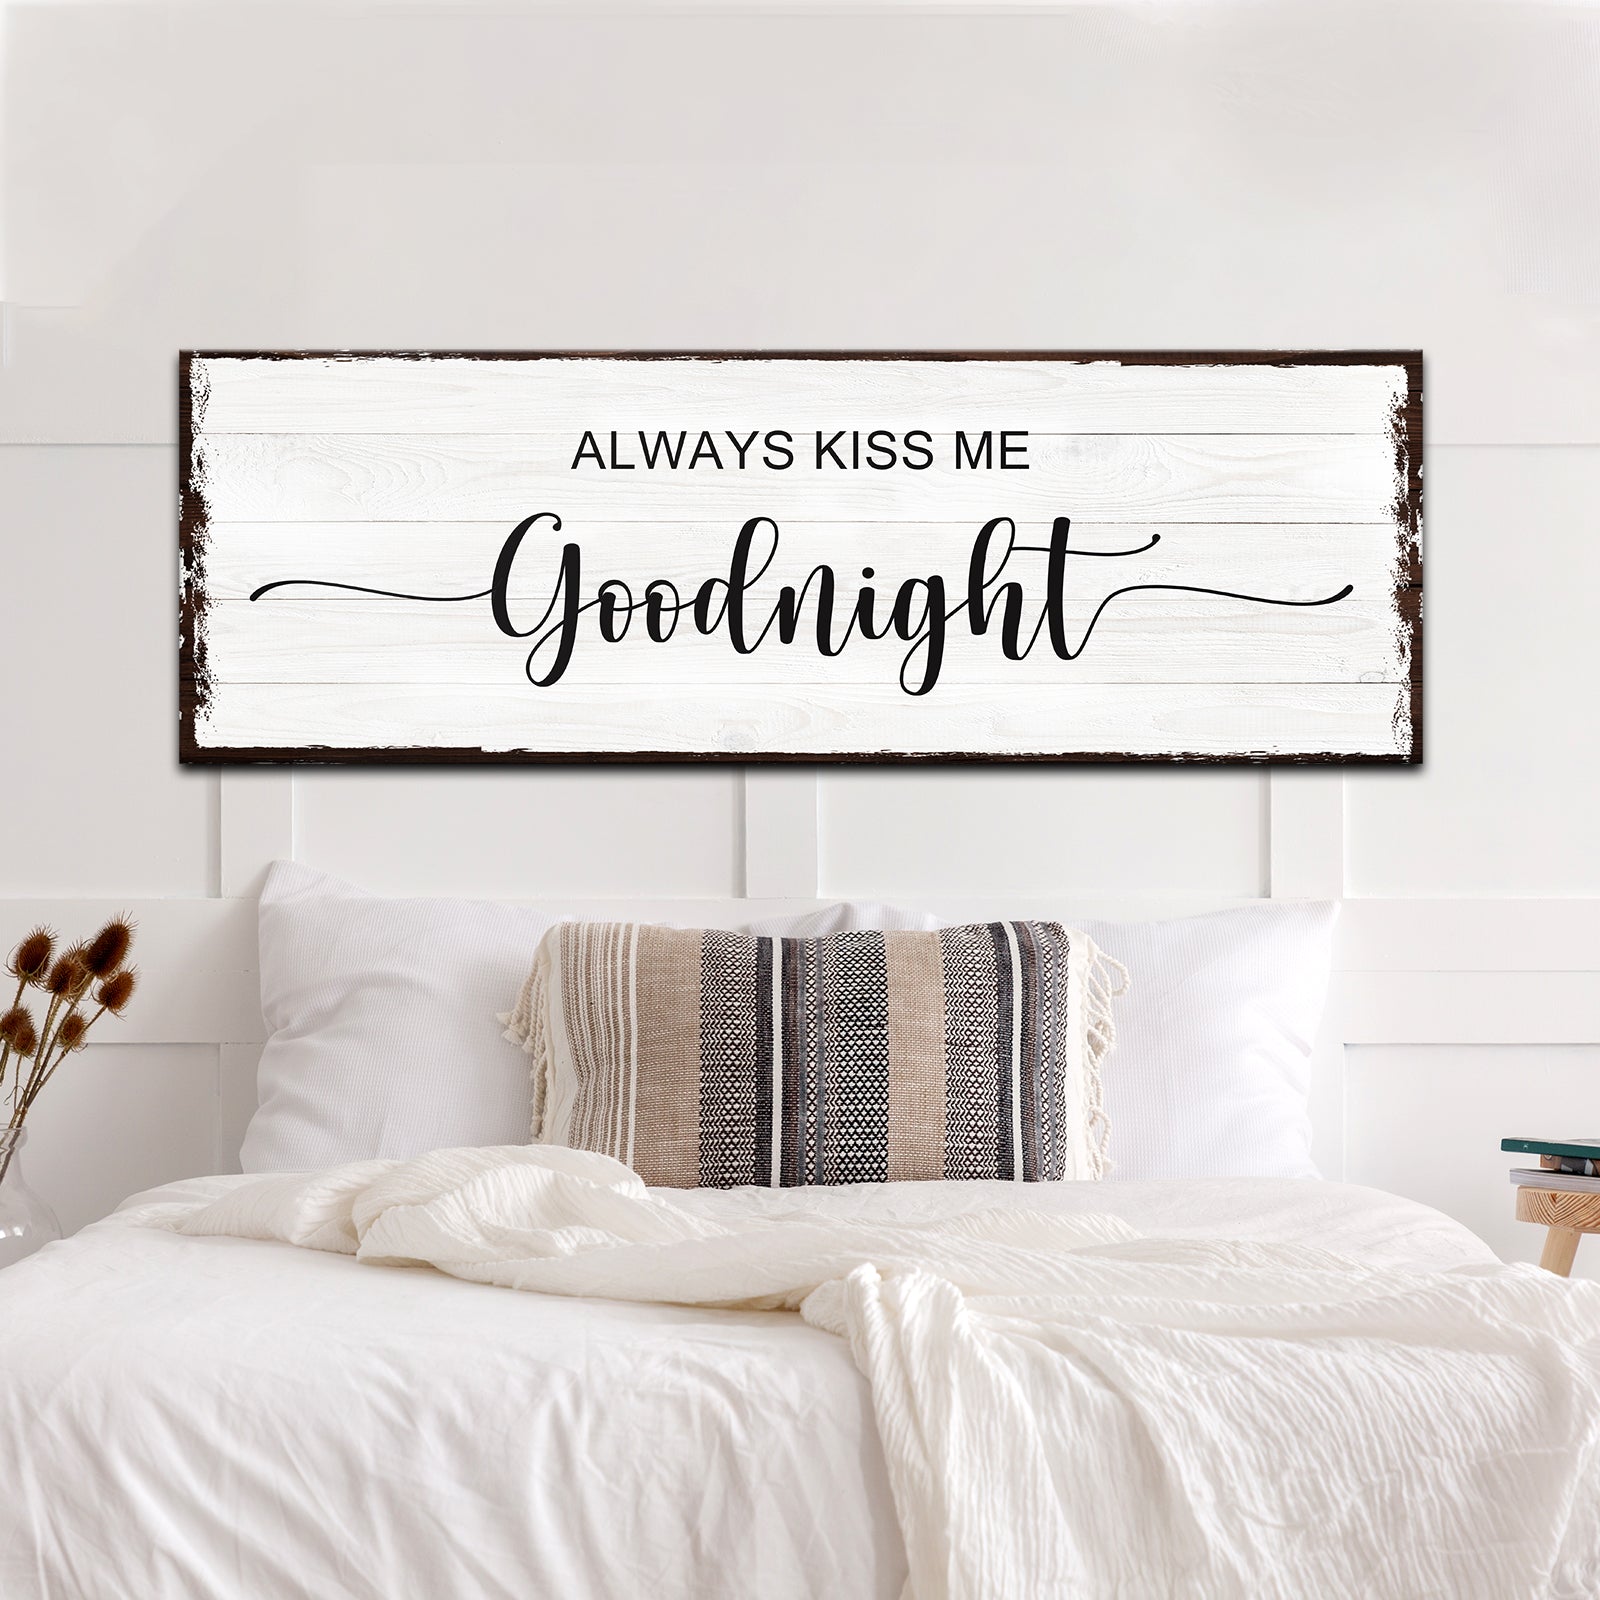 Always Kiss Me Goodnight -  Image by Tailored Canvases